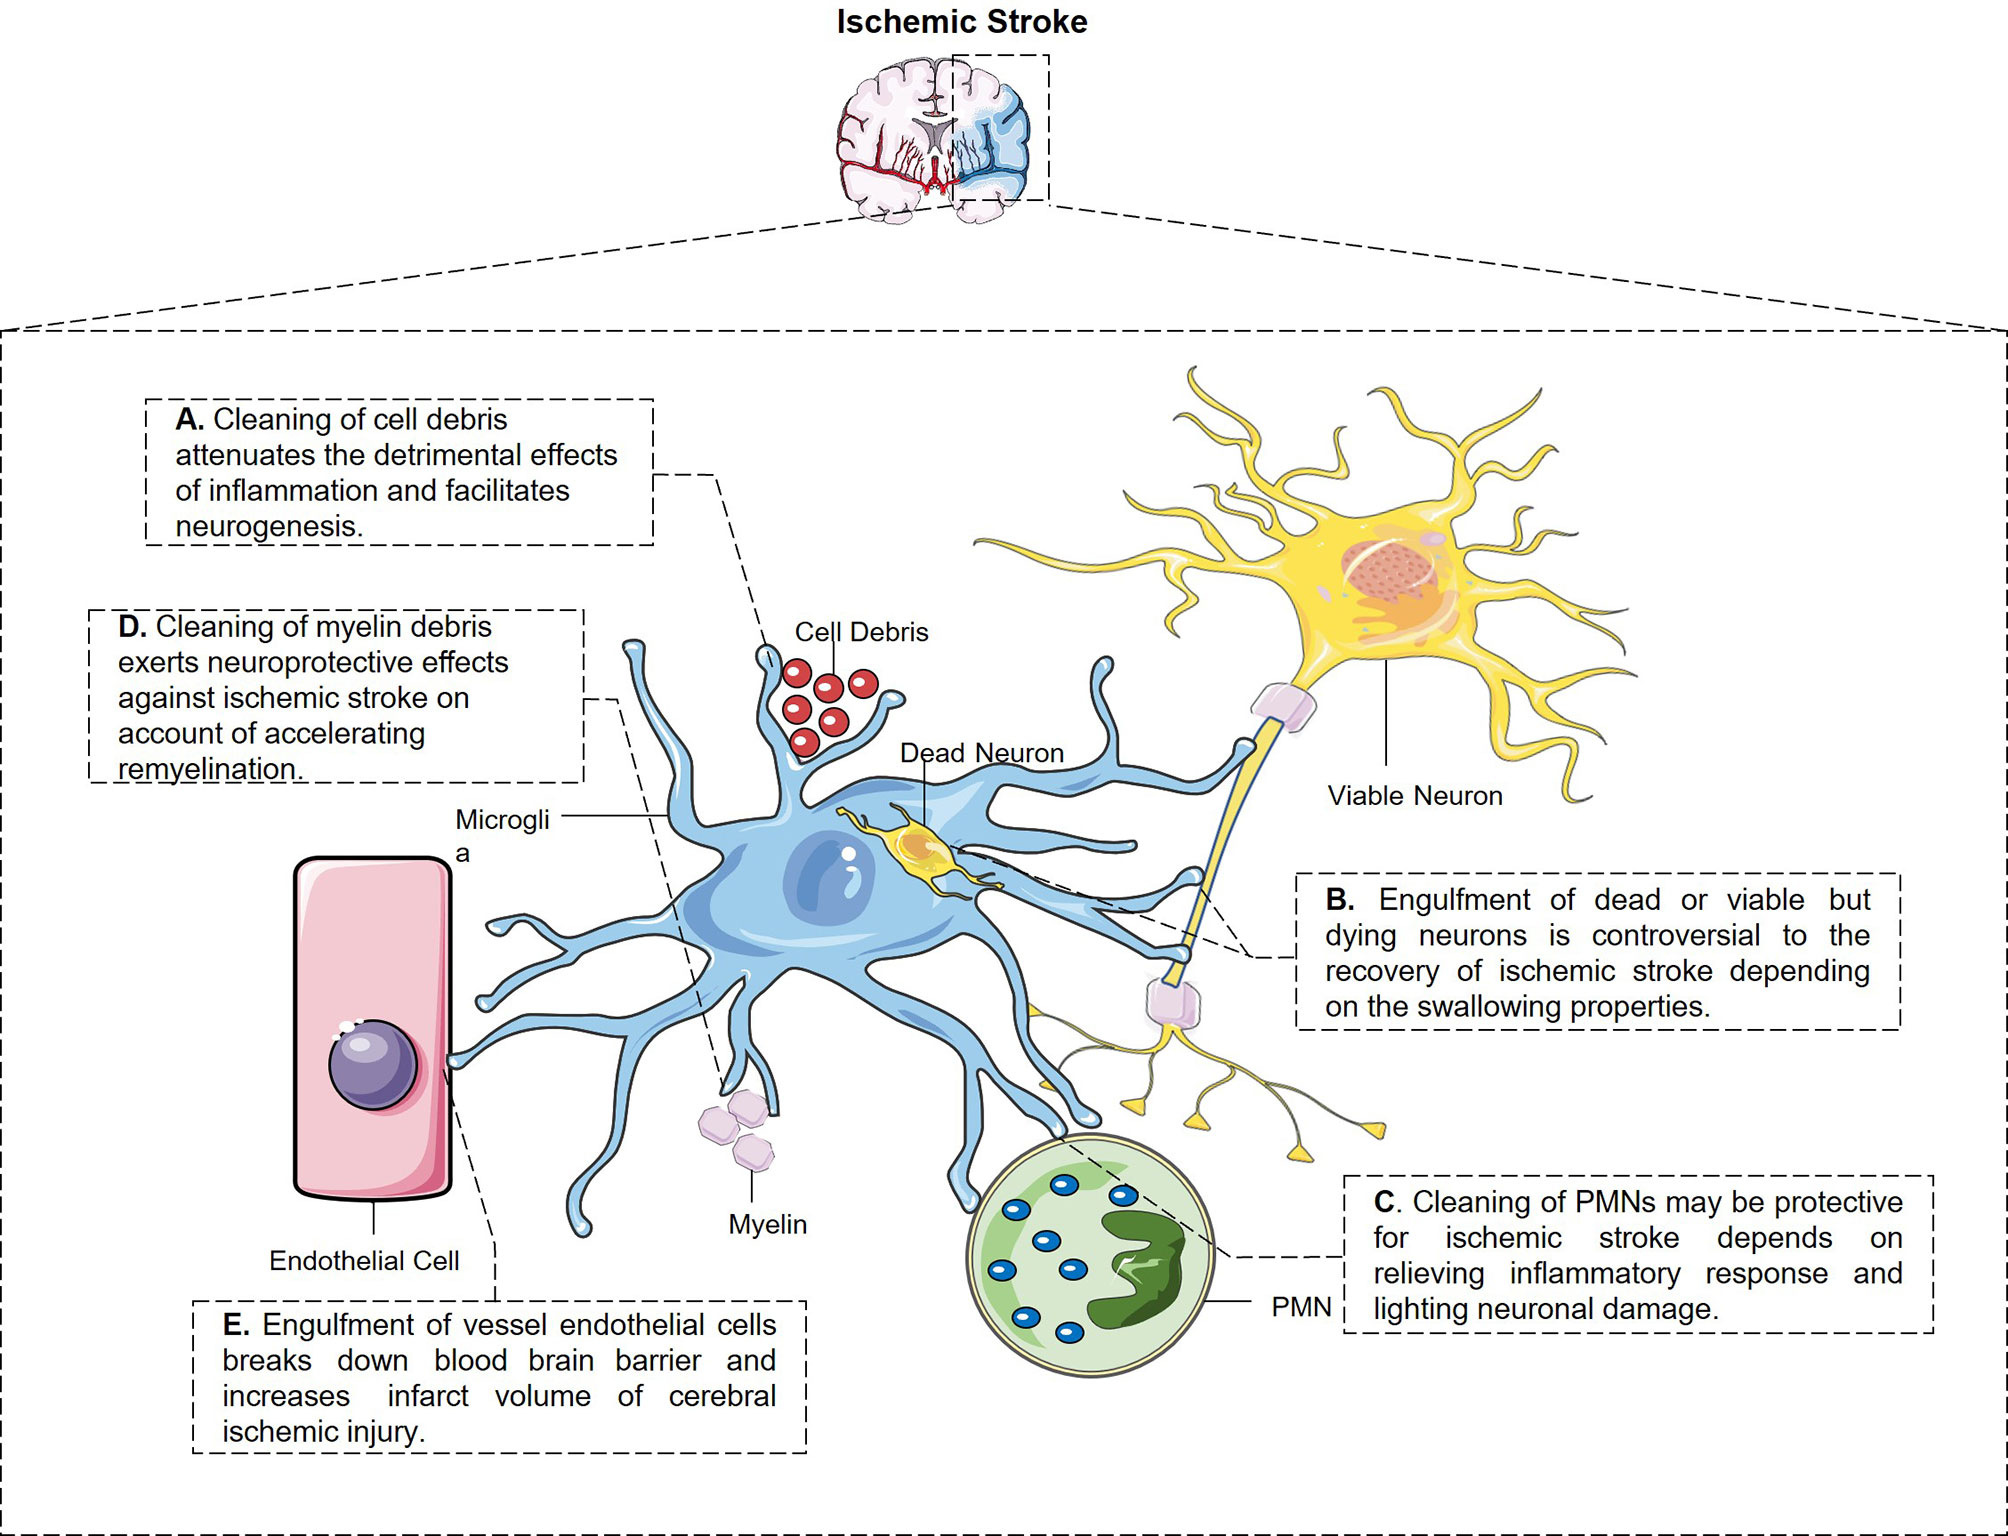 Frontiers | The Role of Microglial Phagocytosis in Ischemic Stroke